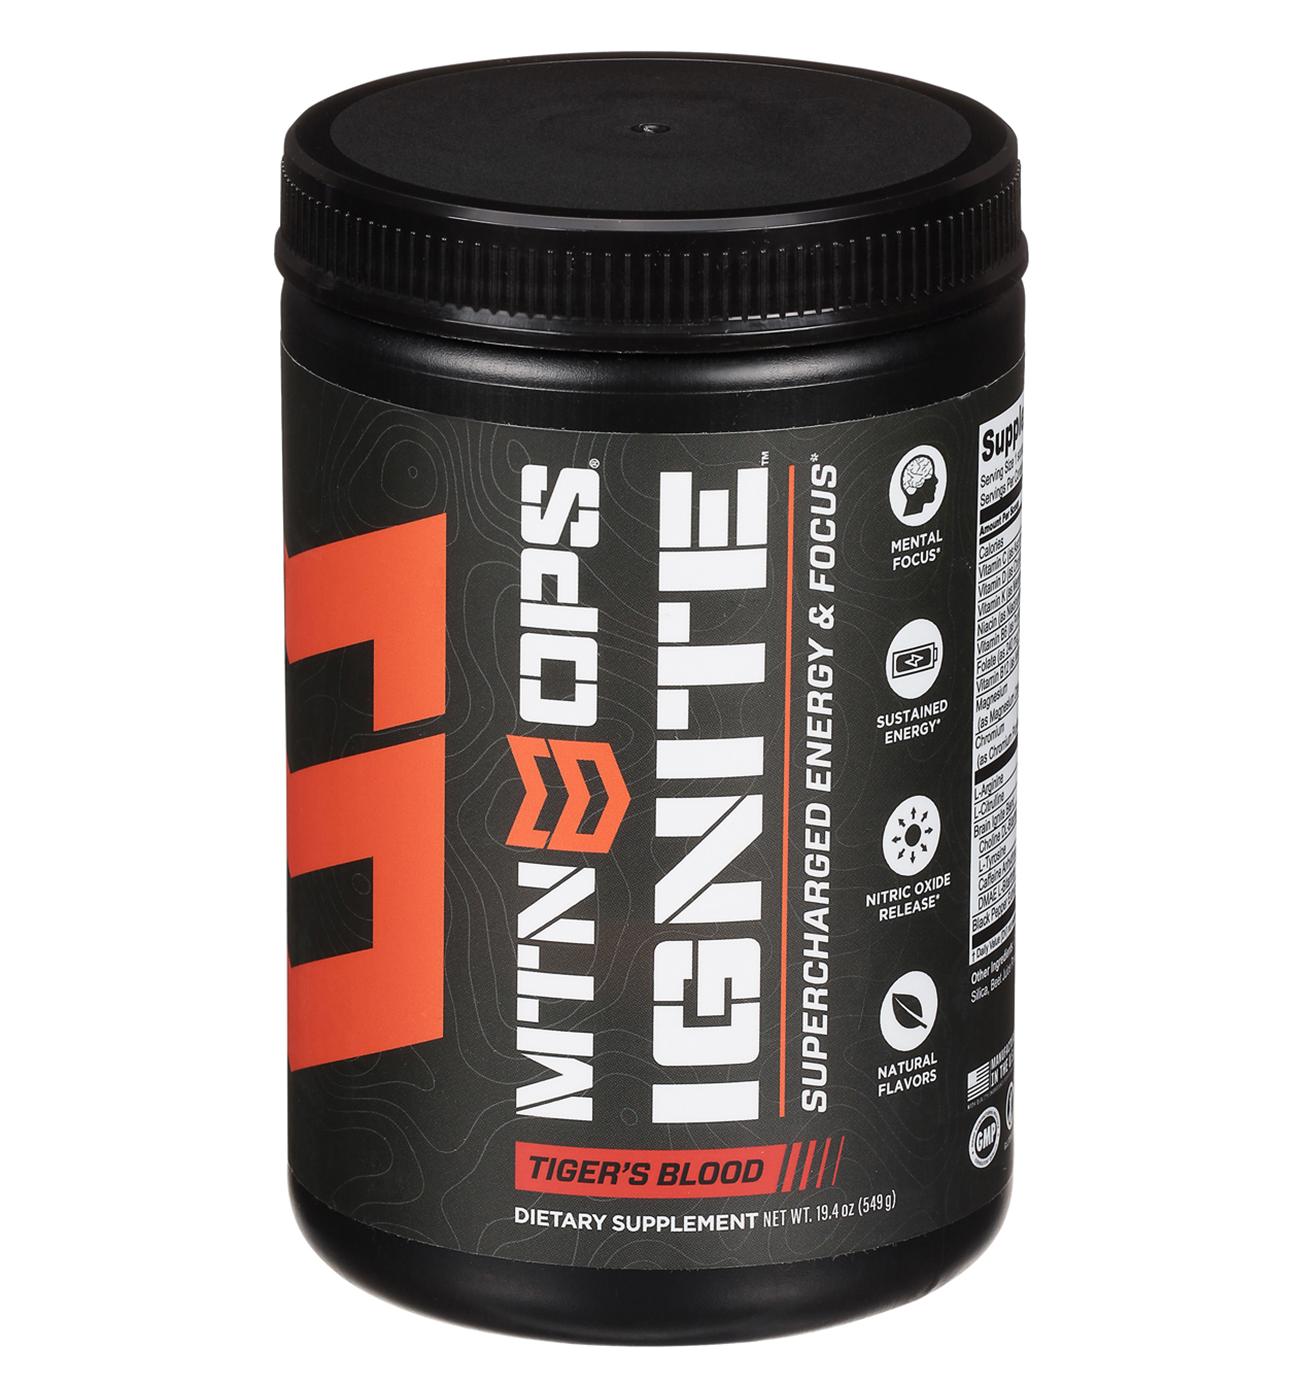 MTN OPS Ignite Energy Drink Mix - Tigers Blood; image 1 of 2